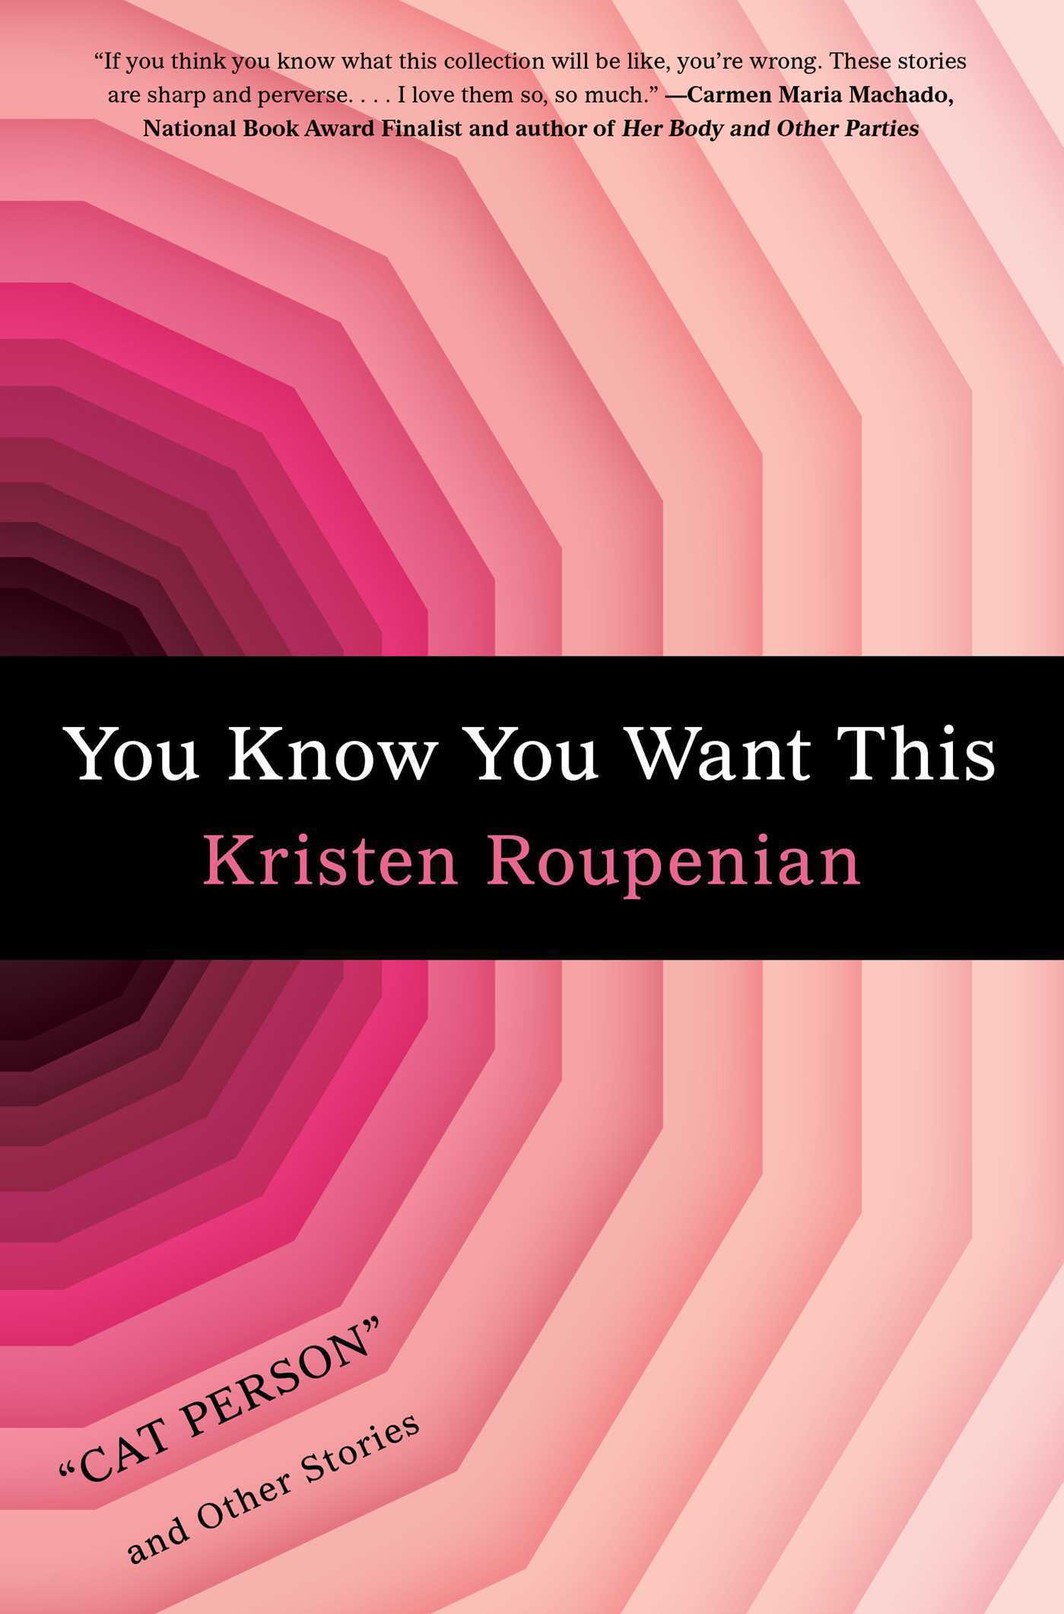 The cover of You Know You Want This: "Cat Person" and Other Stories